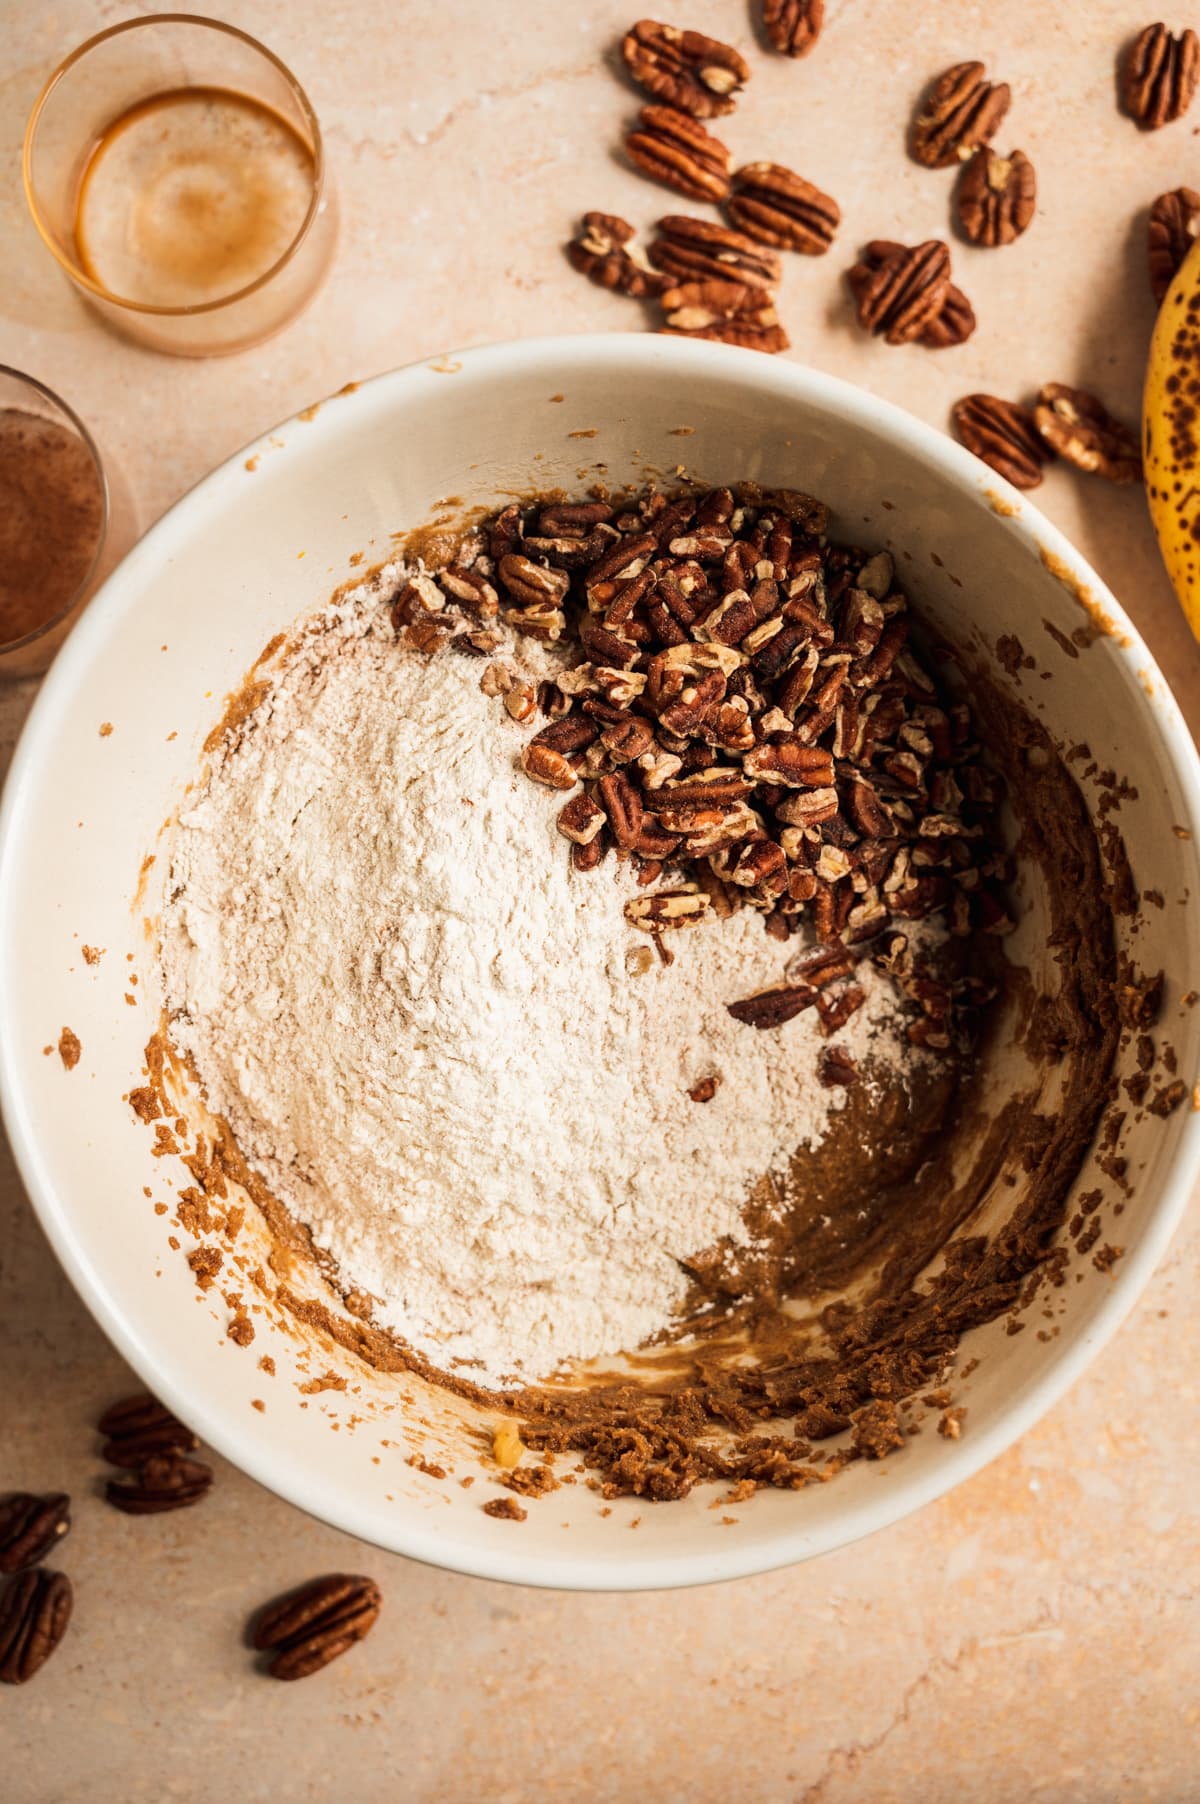 The flour and pecans added to the bowl.